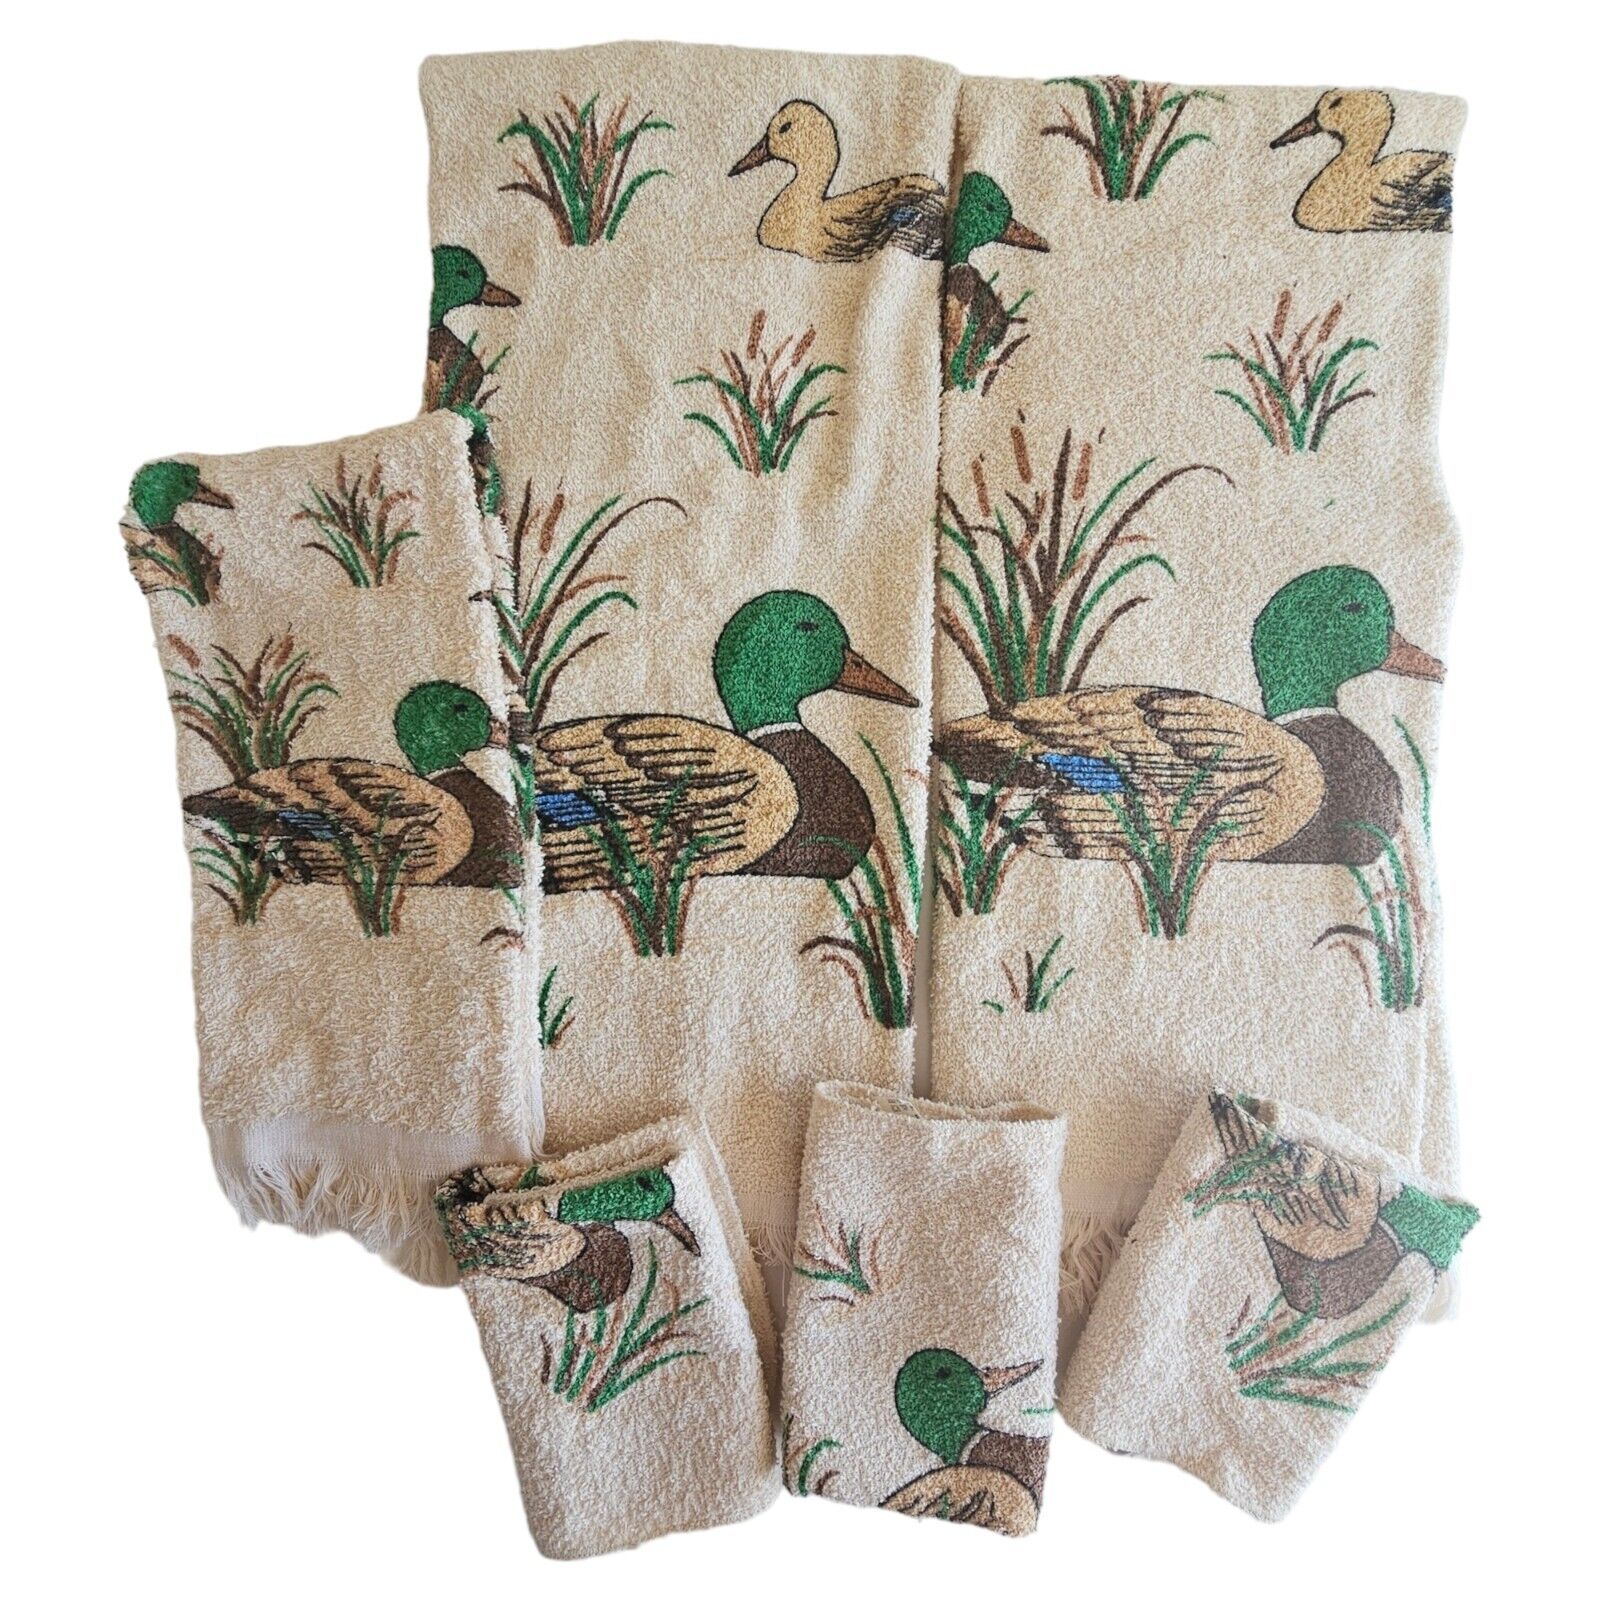 Vintage Cannon Towels Duck In Pond Theme Green, Brown, Beige Set Of 6 Towels